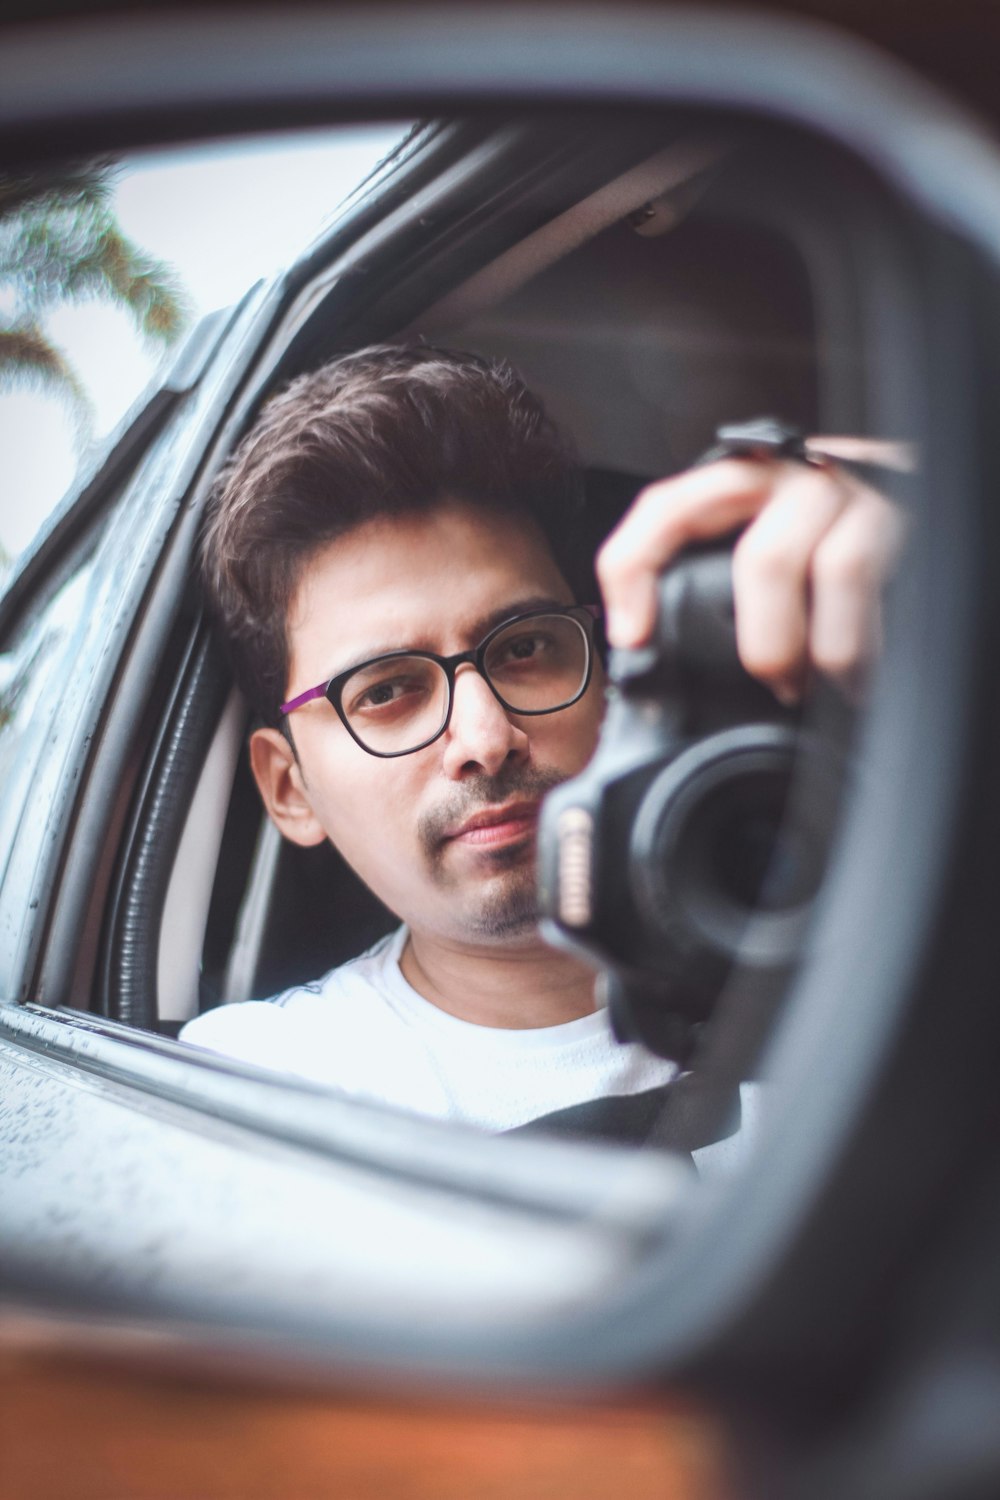 a man taking a picture of himself in a car mirror